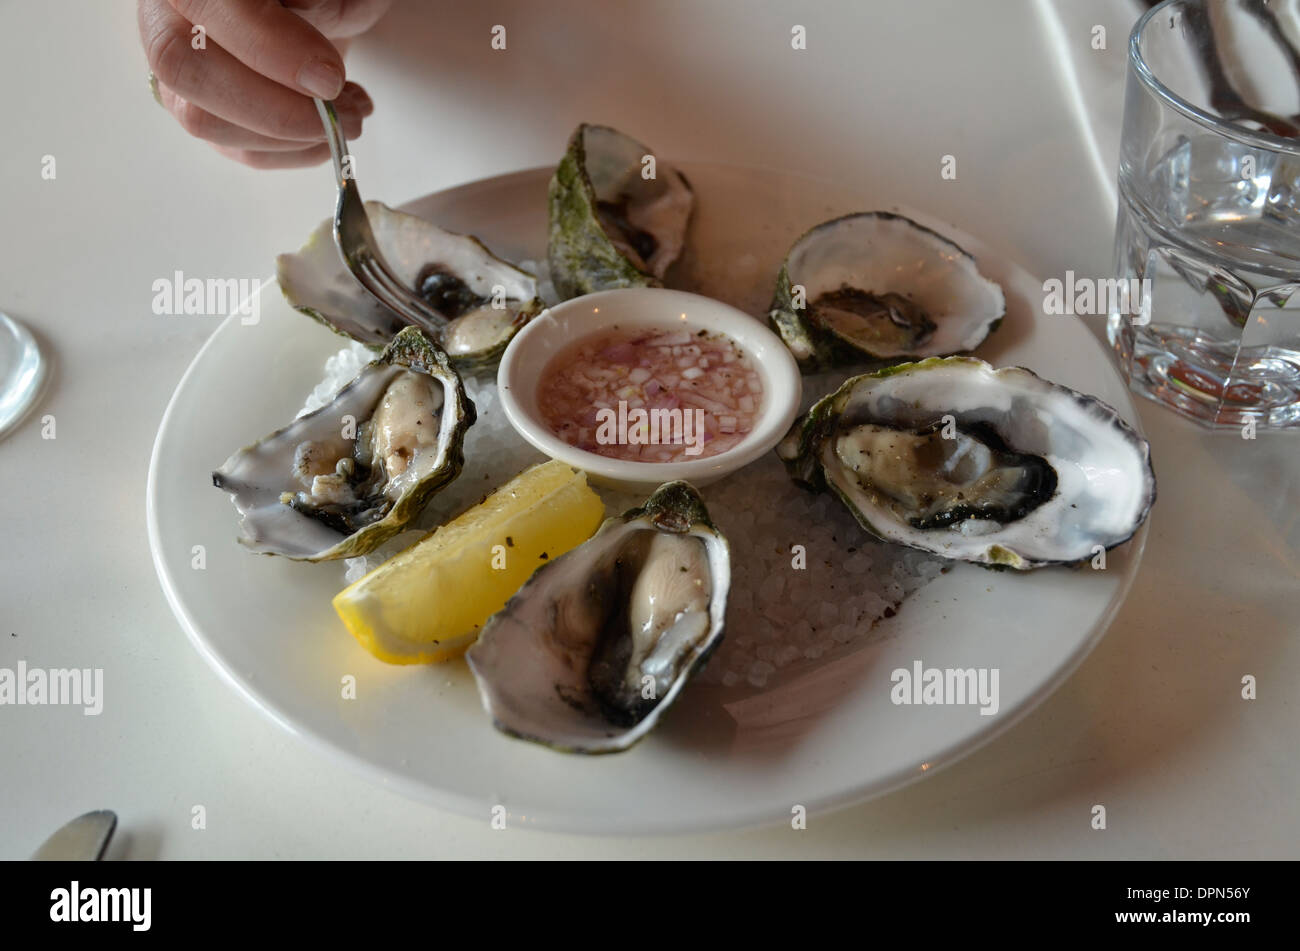 A woman's hand reaching for an oyster Stock Photo